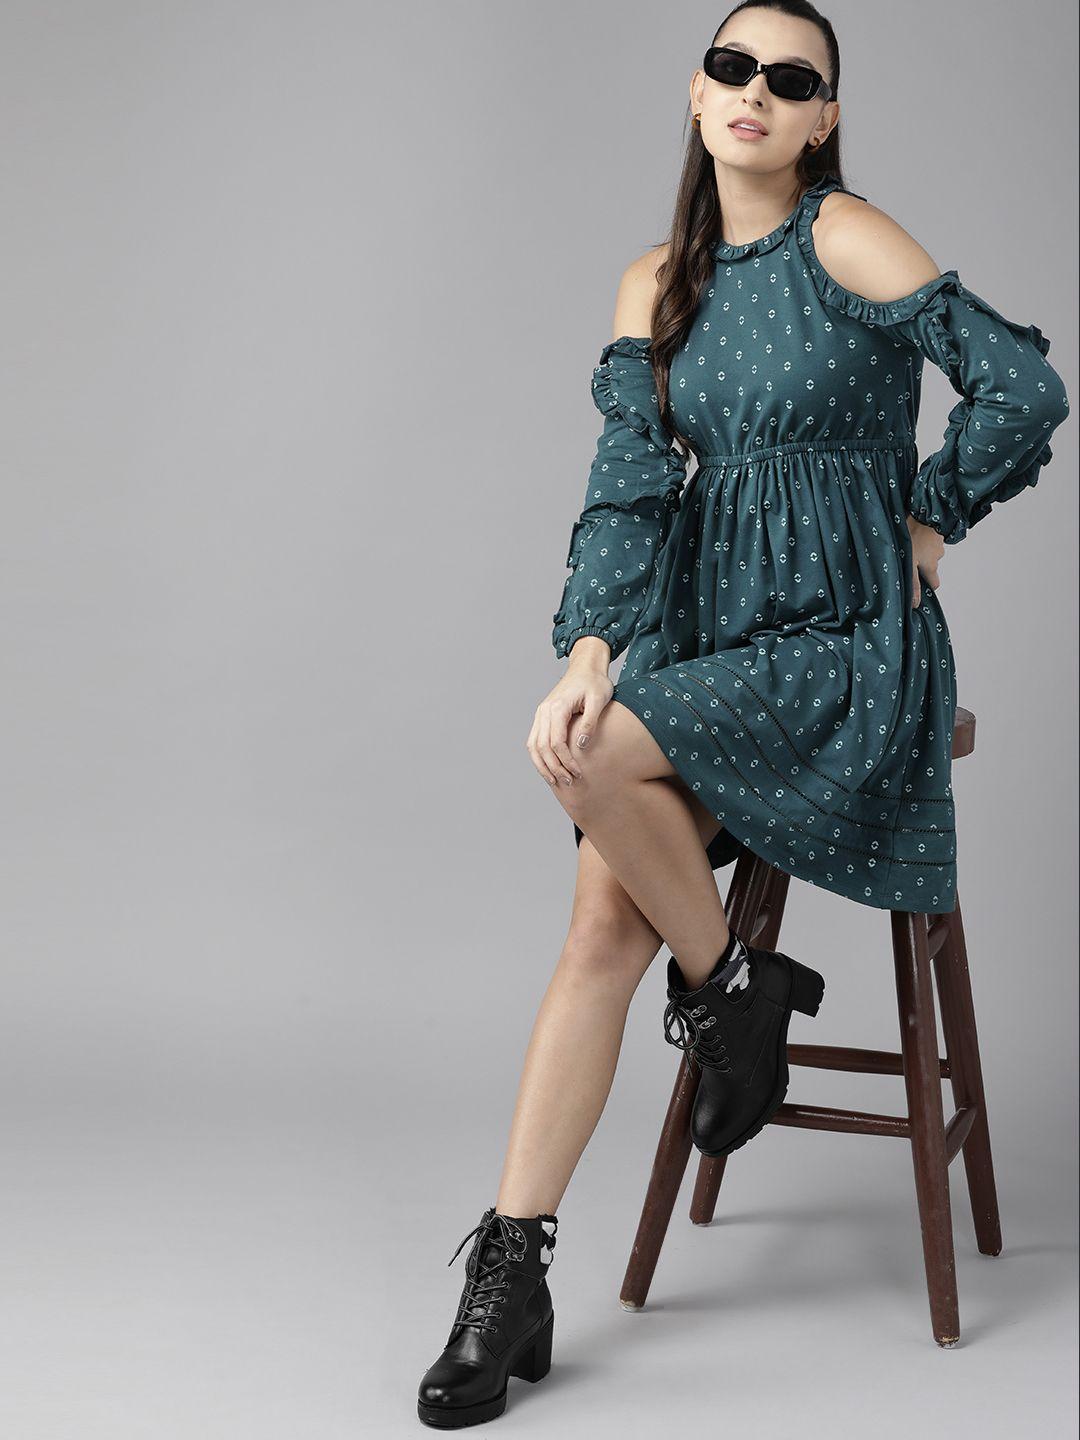 the-roadster-lifestyle-co.-cold-shoulder-ruffled-a-line-dress